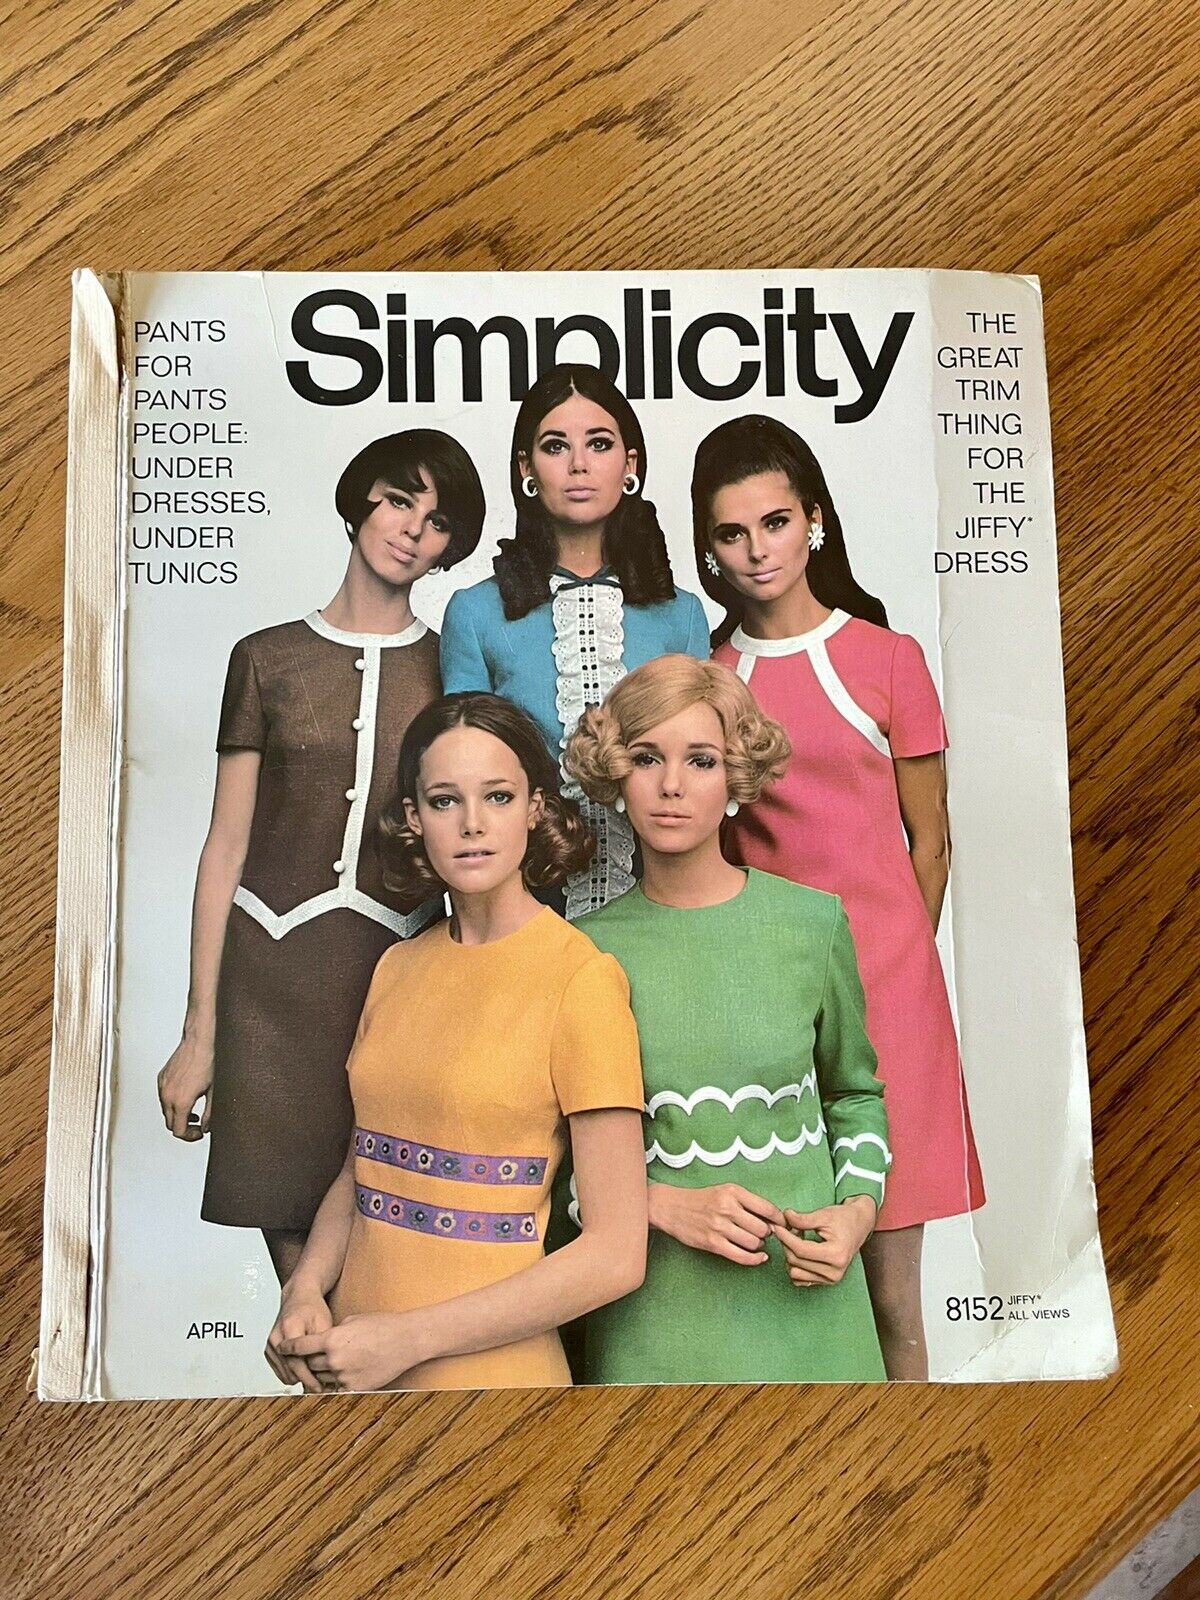 Vintage Simplicity Sewing Pattern Counter Order Book Catalog April 1969